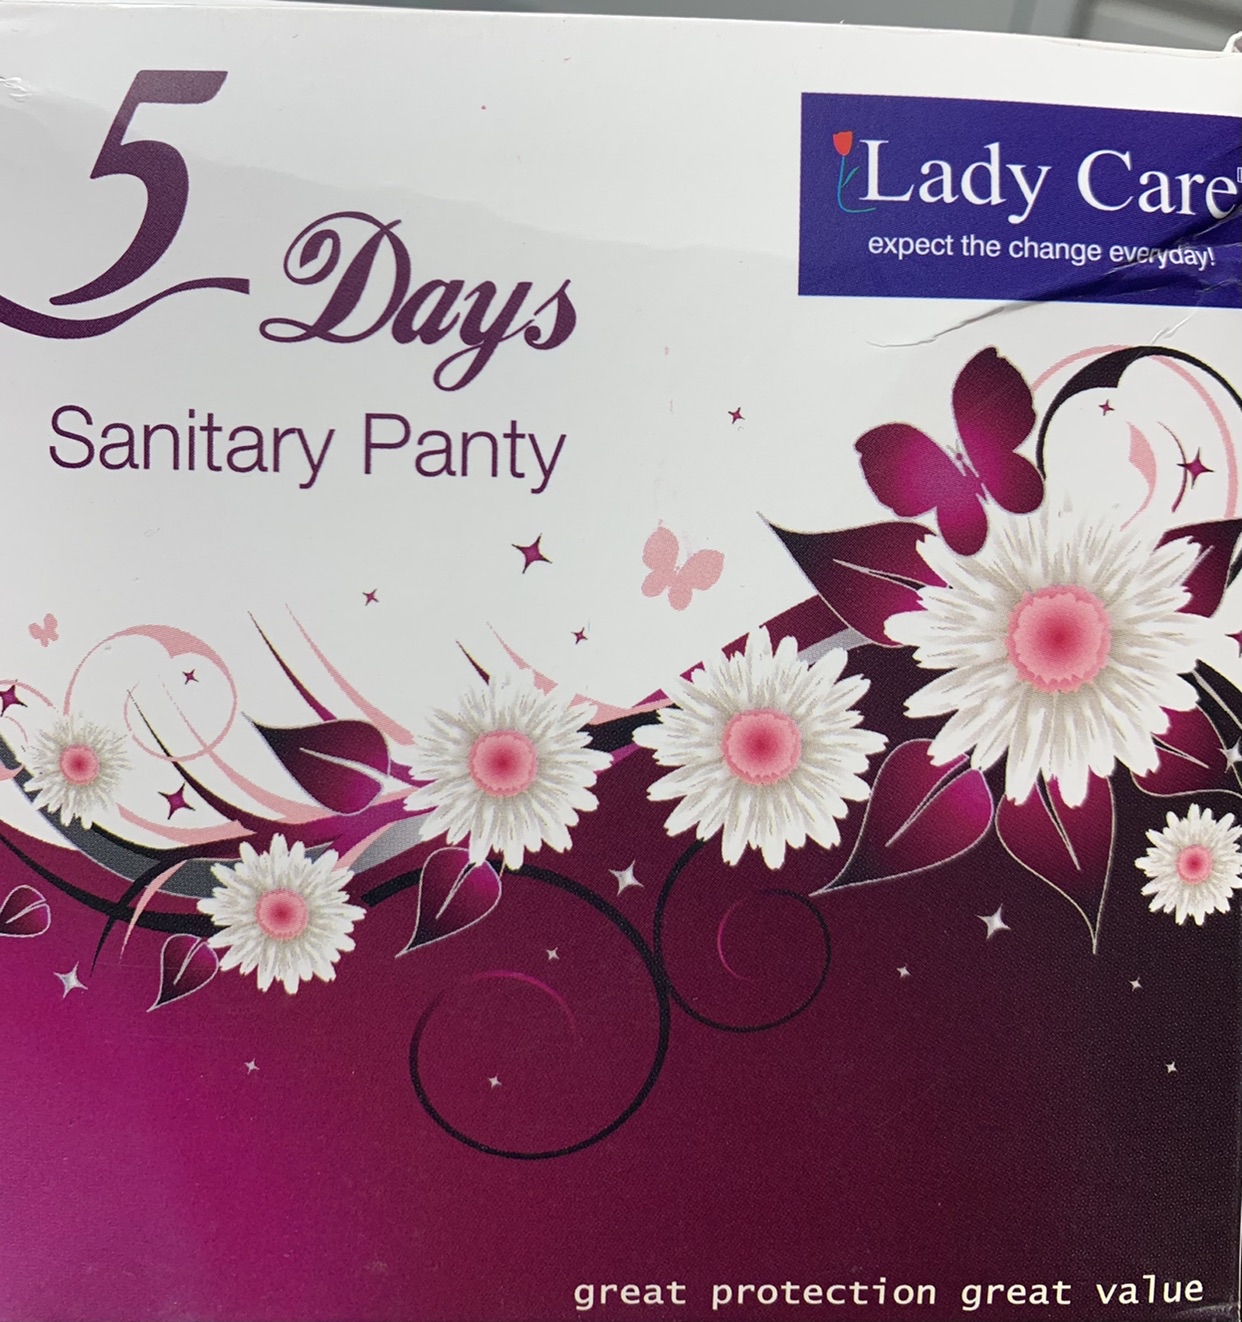 Lady Care - Expect the change everyday!